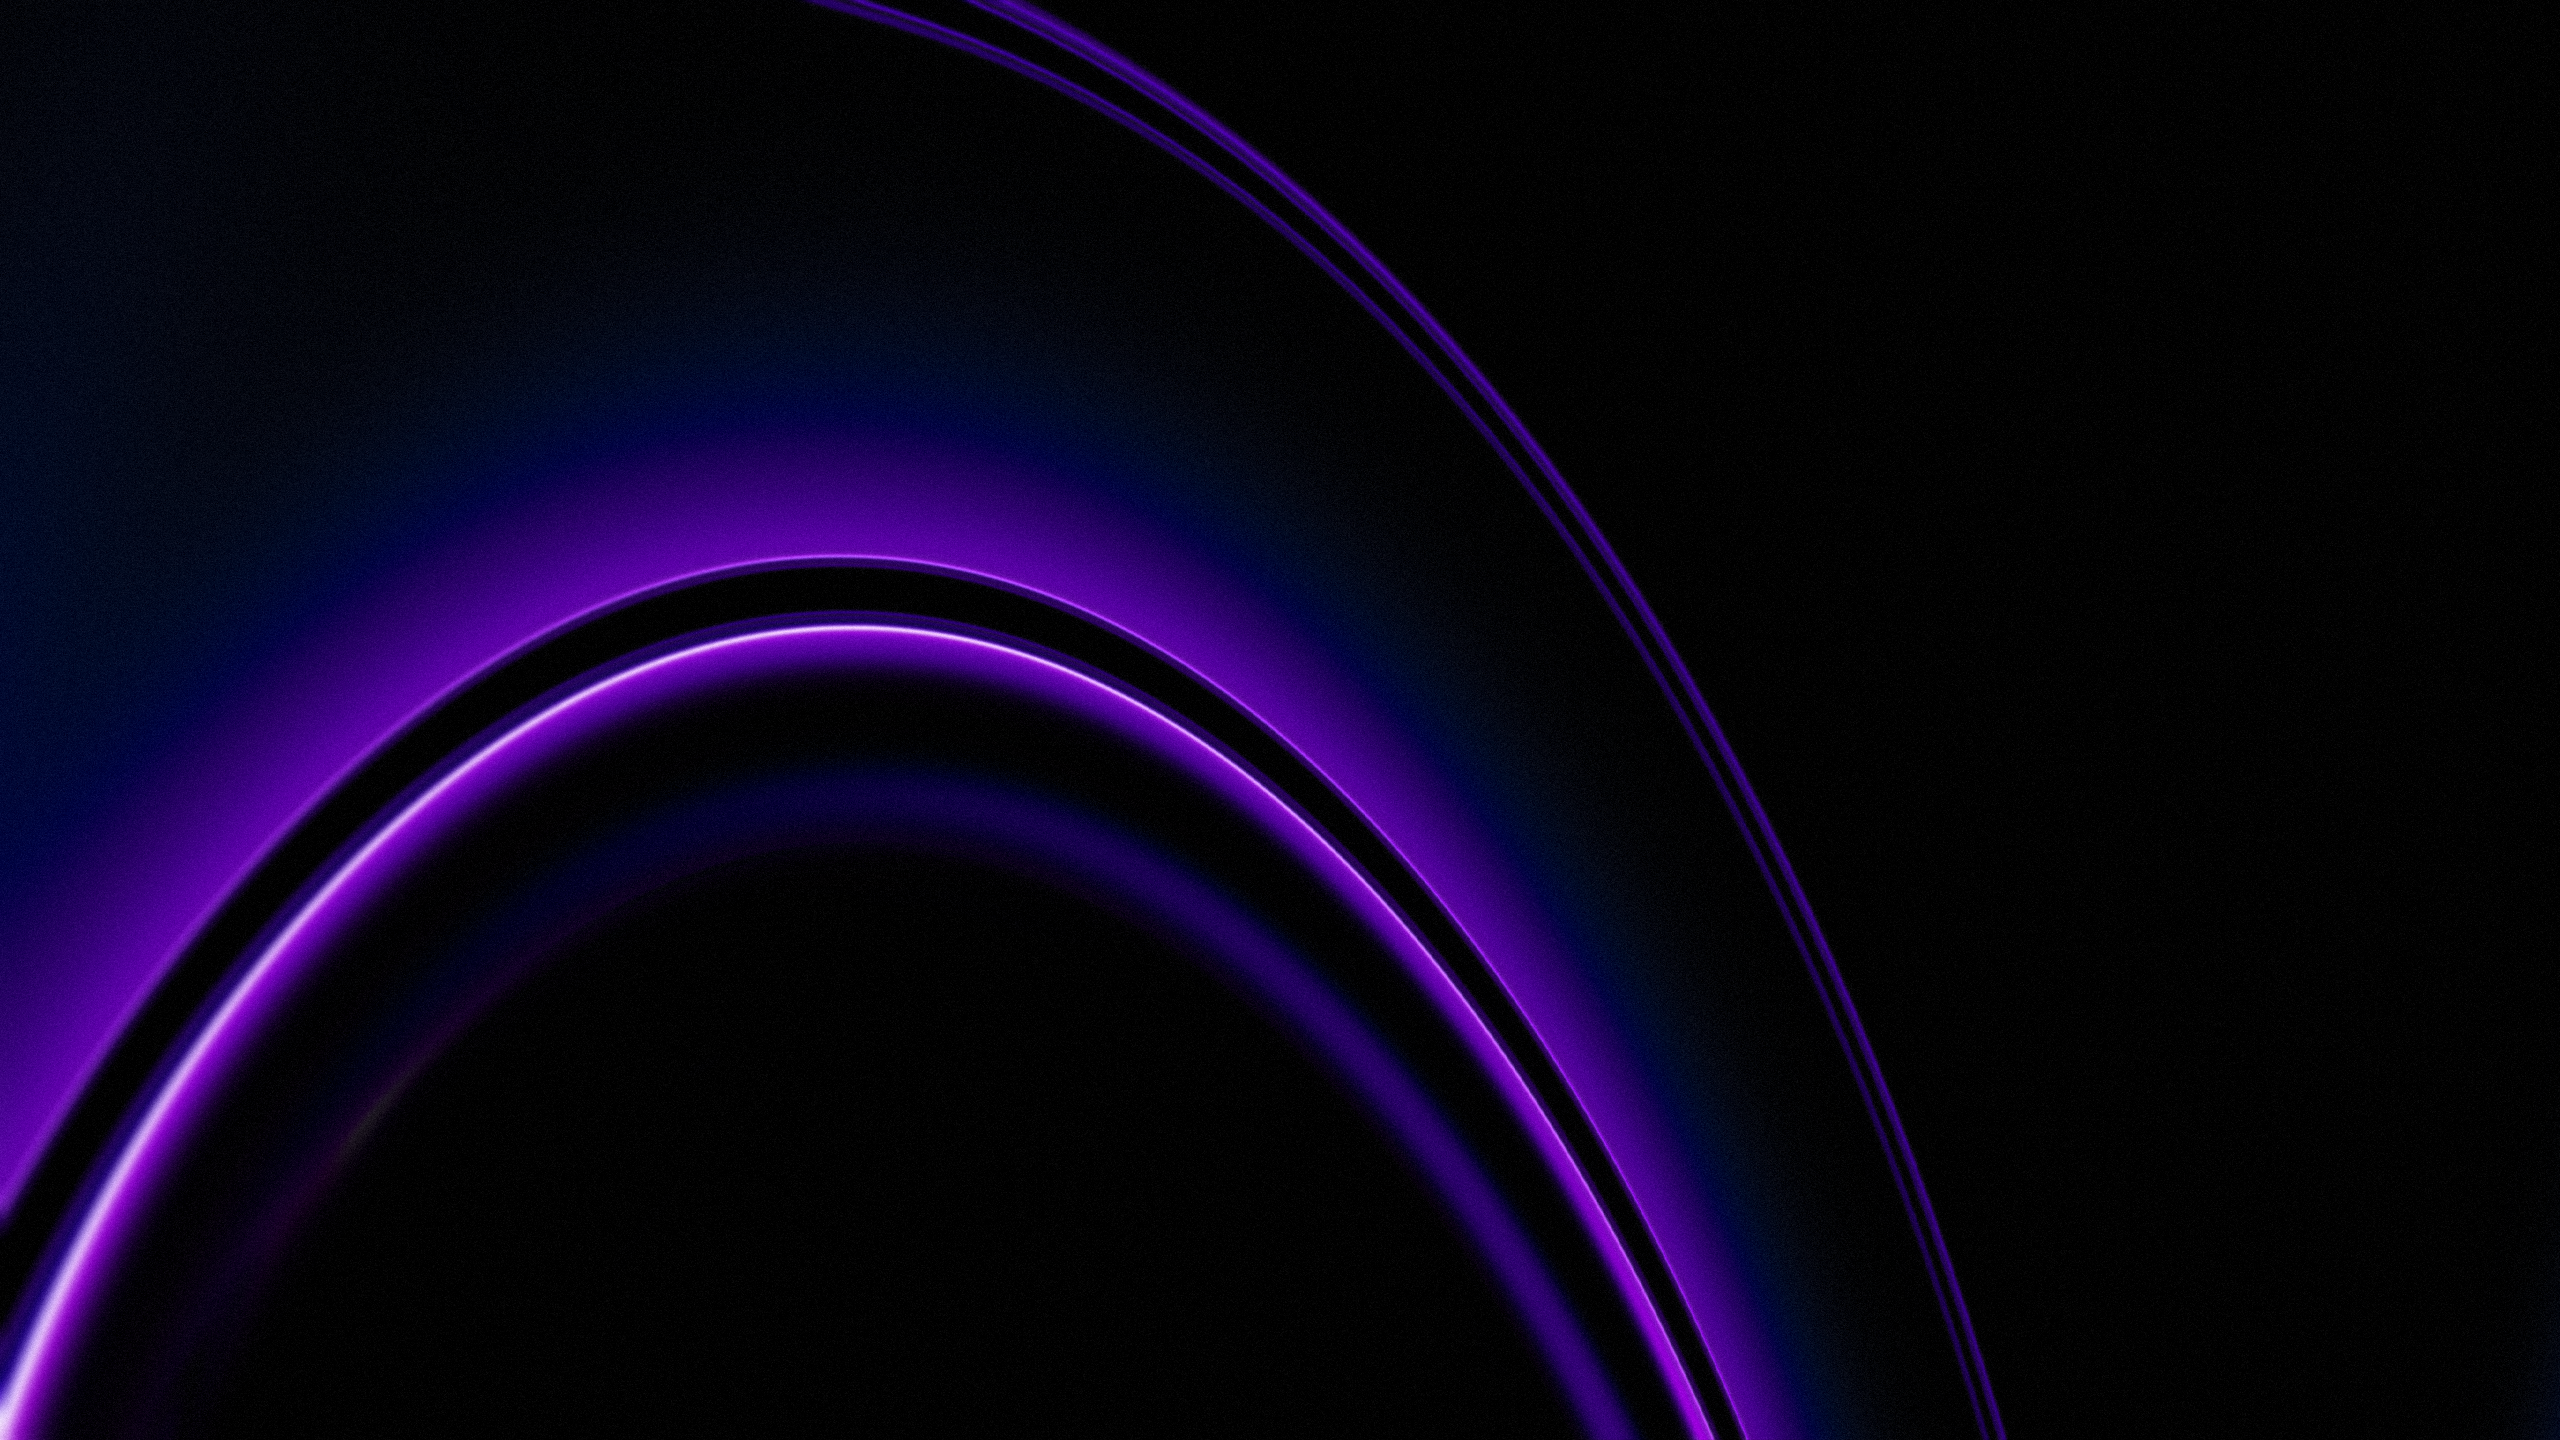 Neon WQHD, QHD, 16:9 Wallpapers, HD Neon 2560x1440 Backgrounds, Free Images  Download